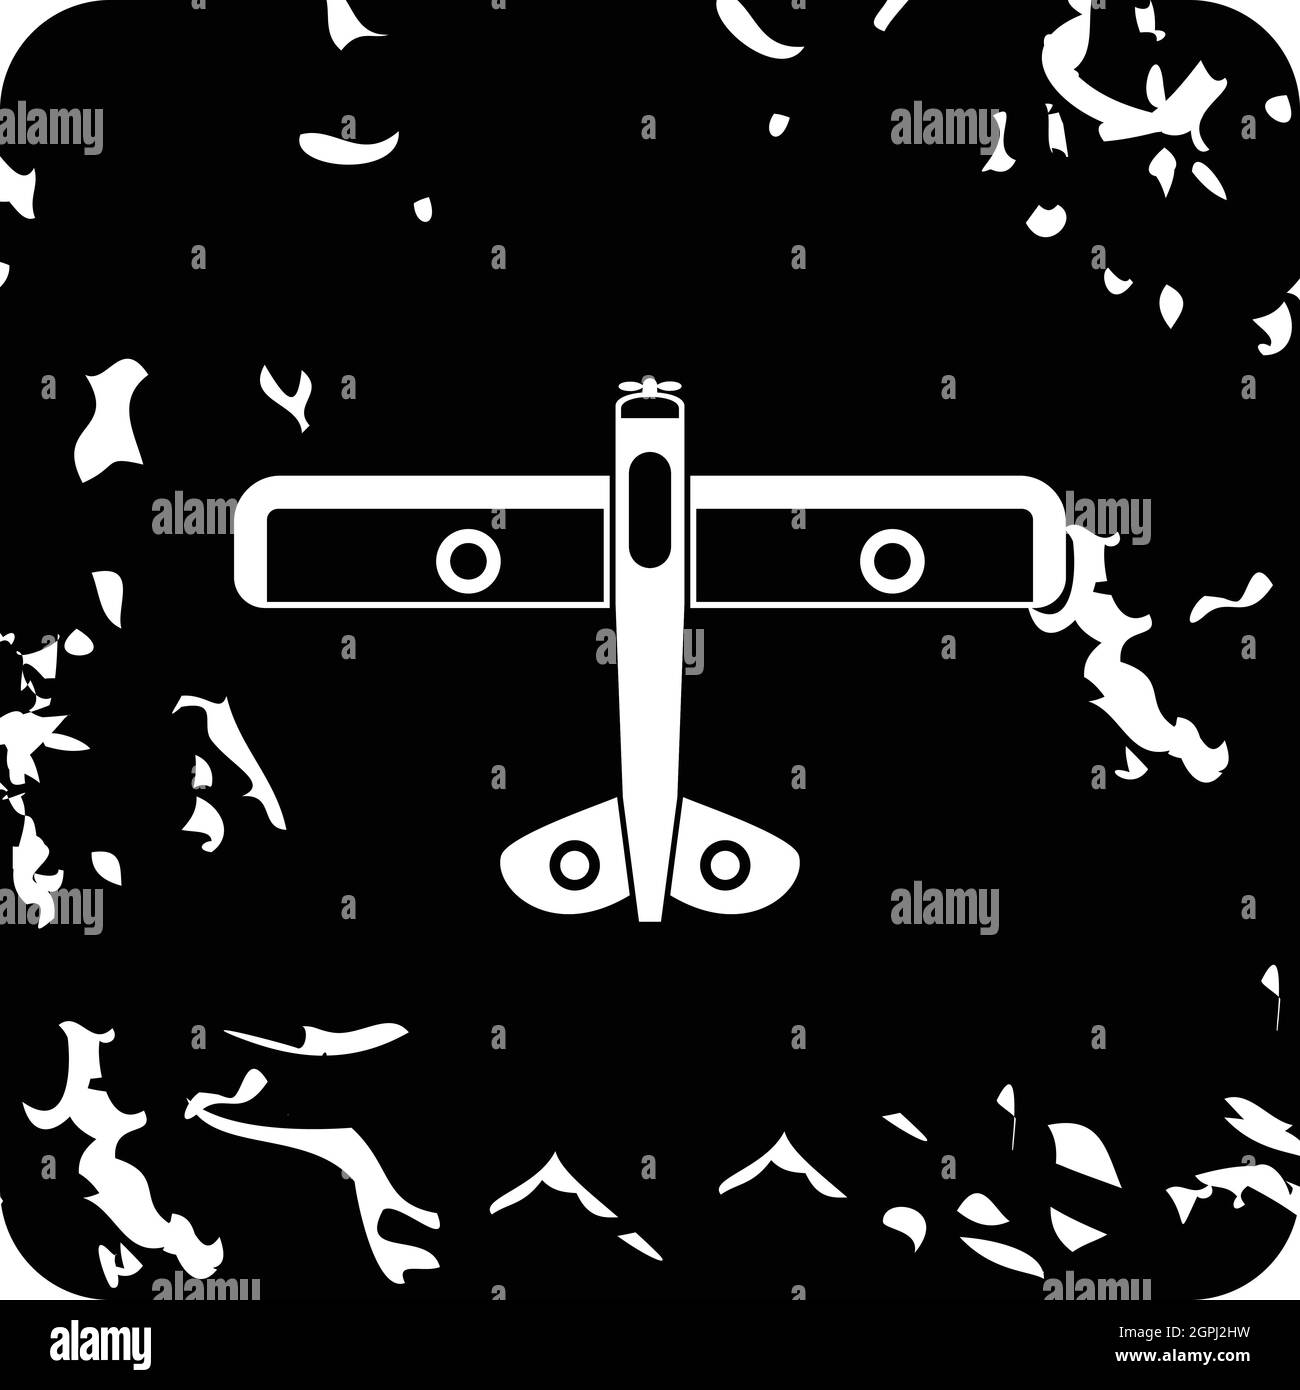 Army biplane icon, grunge style Stock Vector